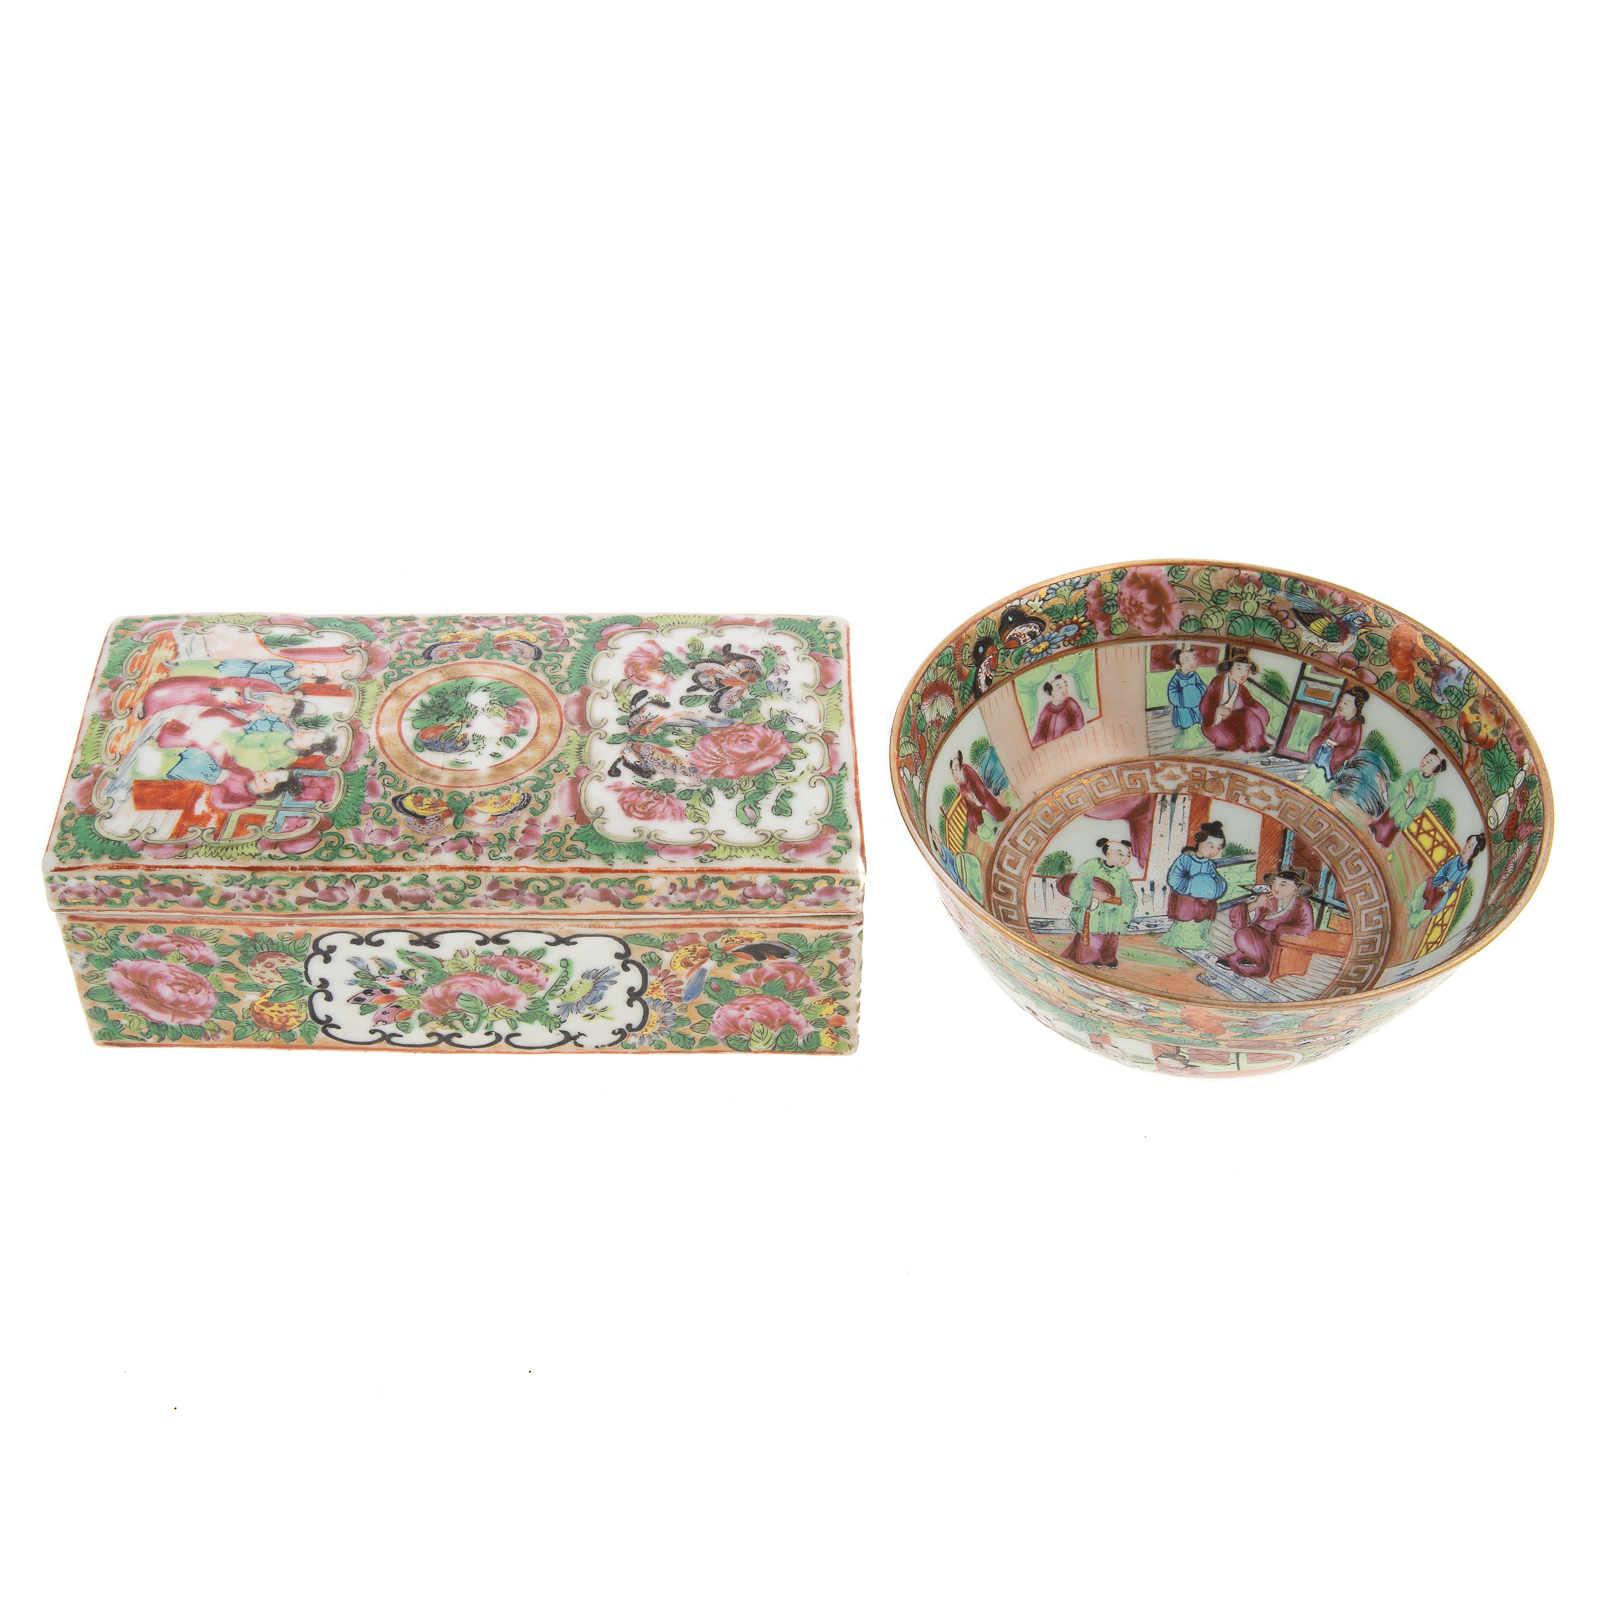 CHINESE EXPORT ROSE MEDALLION BOX 36aaba